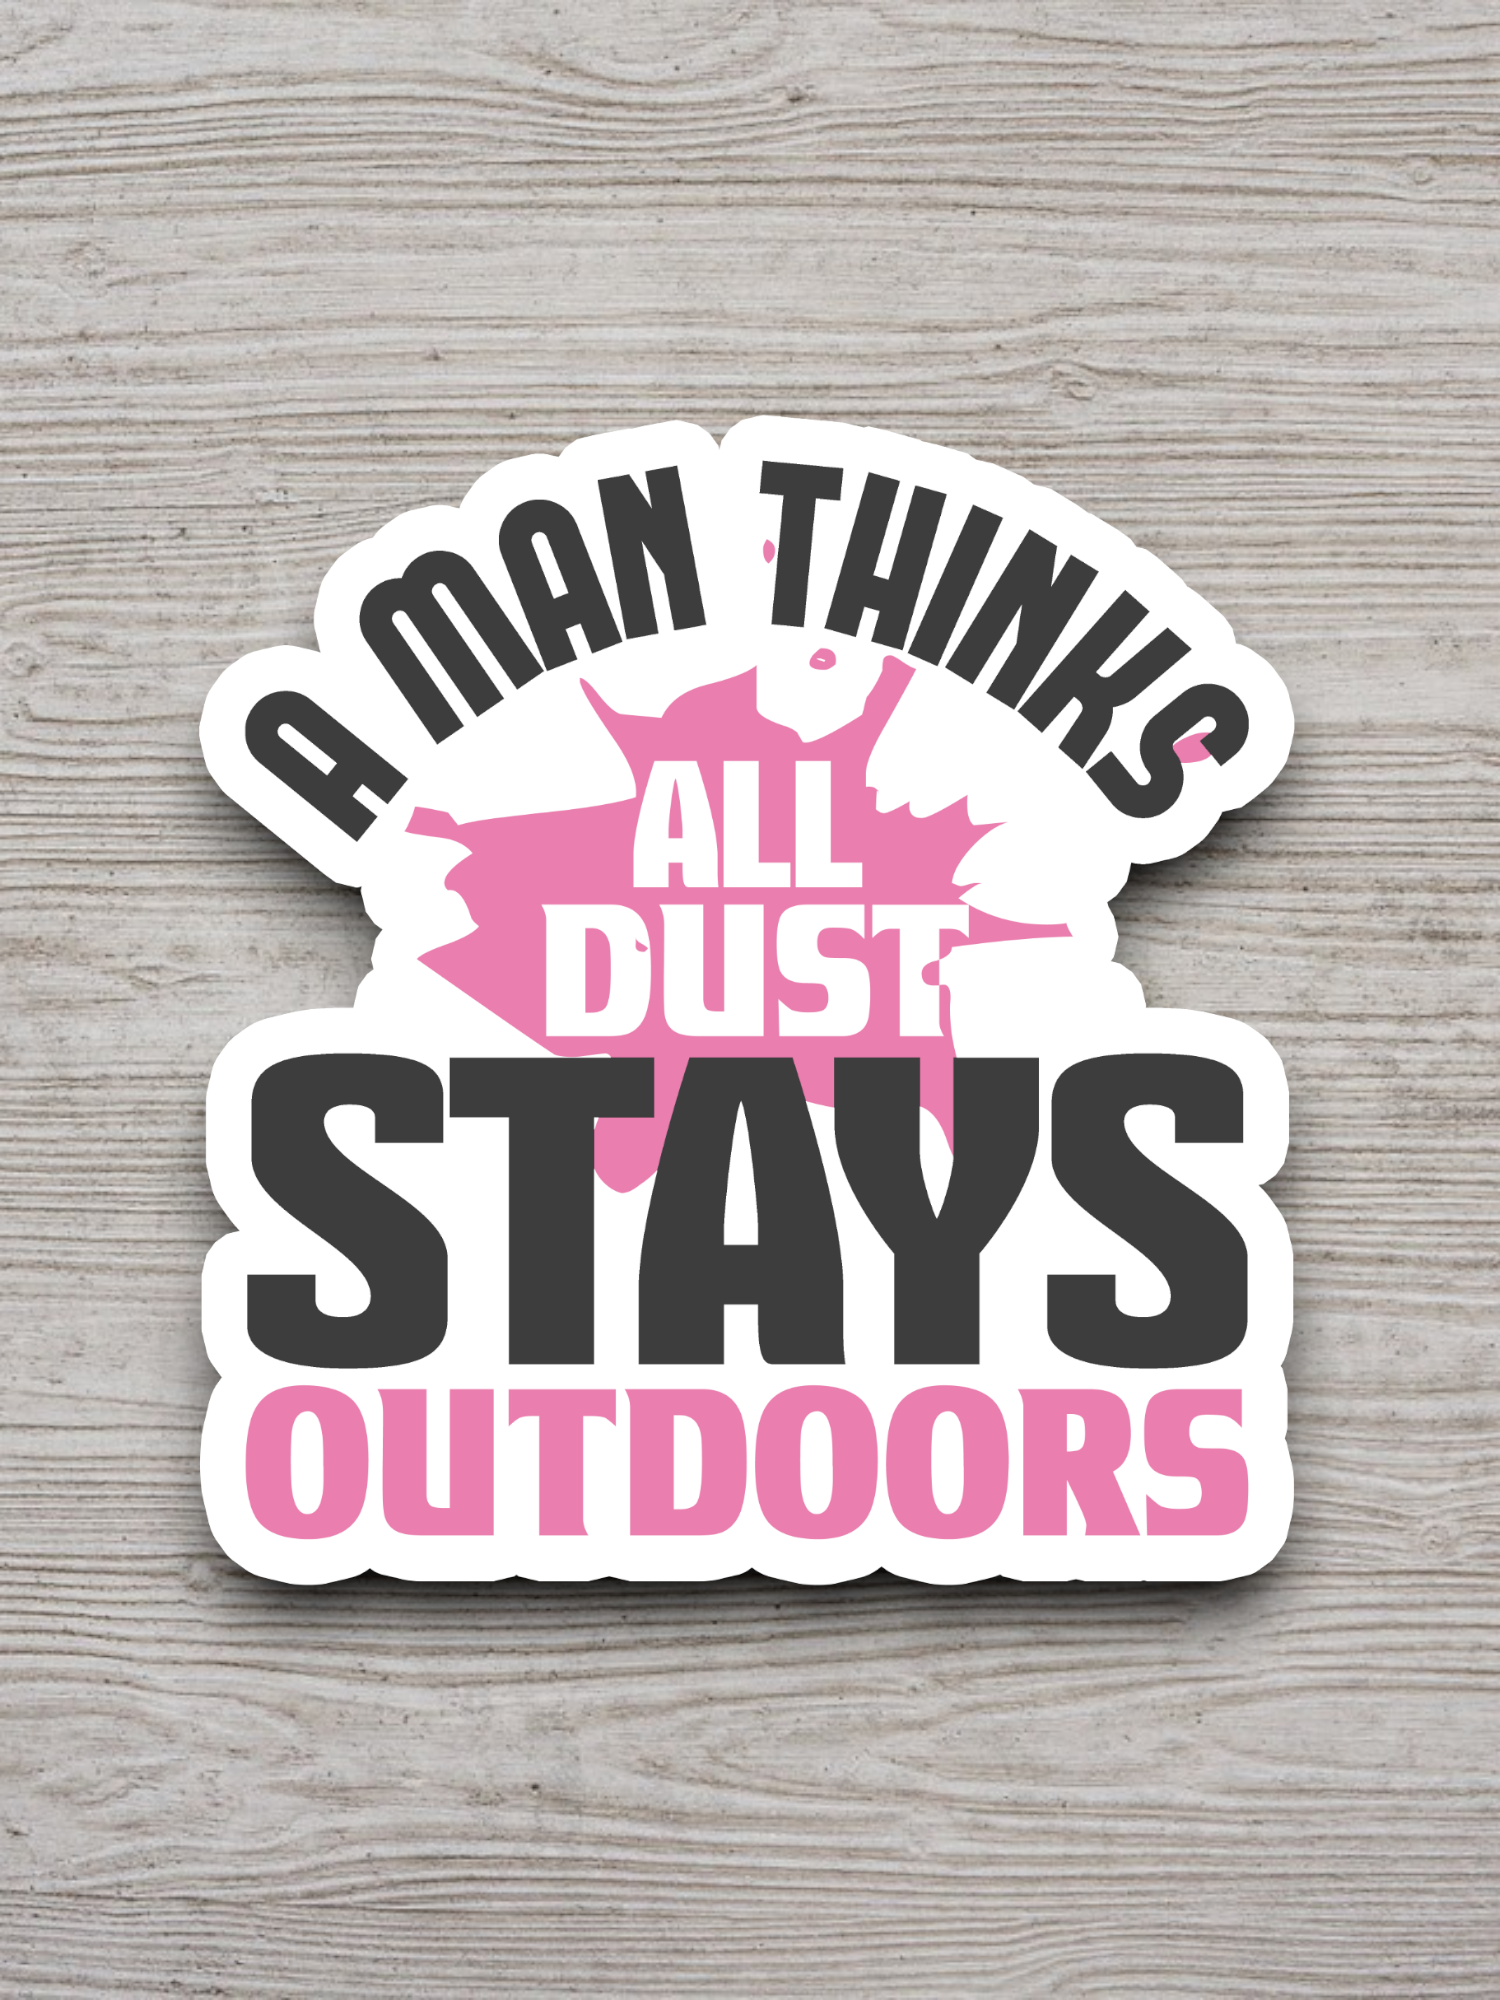 A Man Thinks All Dust Stays Outdoors Sticker